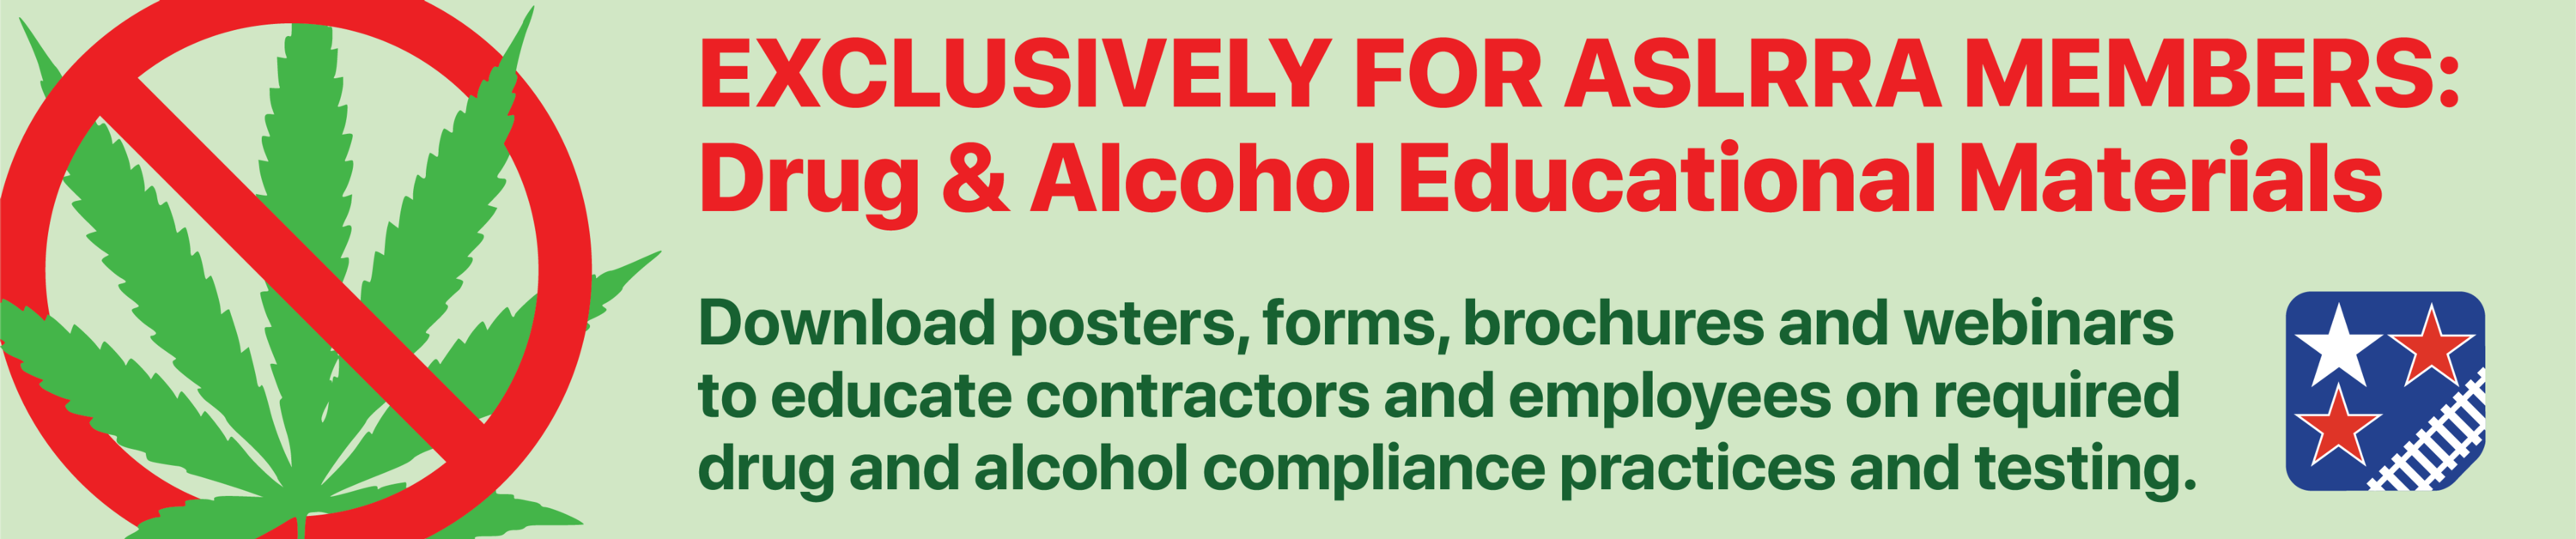 ASLRRA Drug and Alcohol Educational Resources